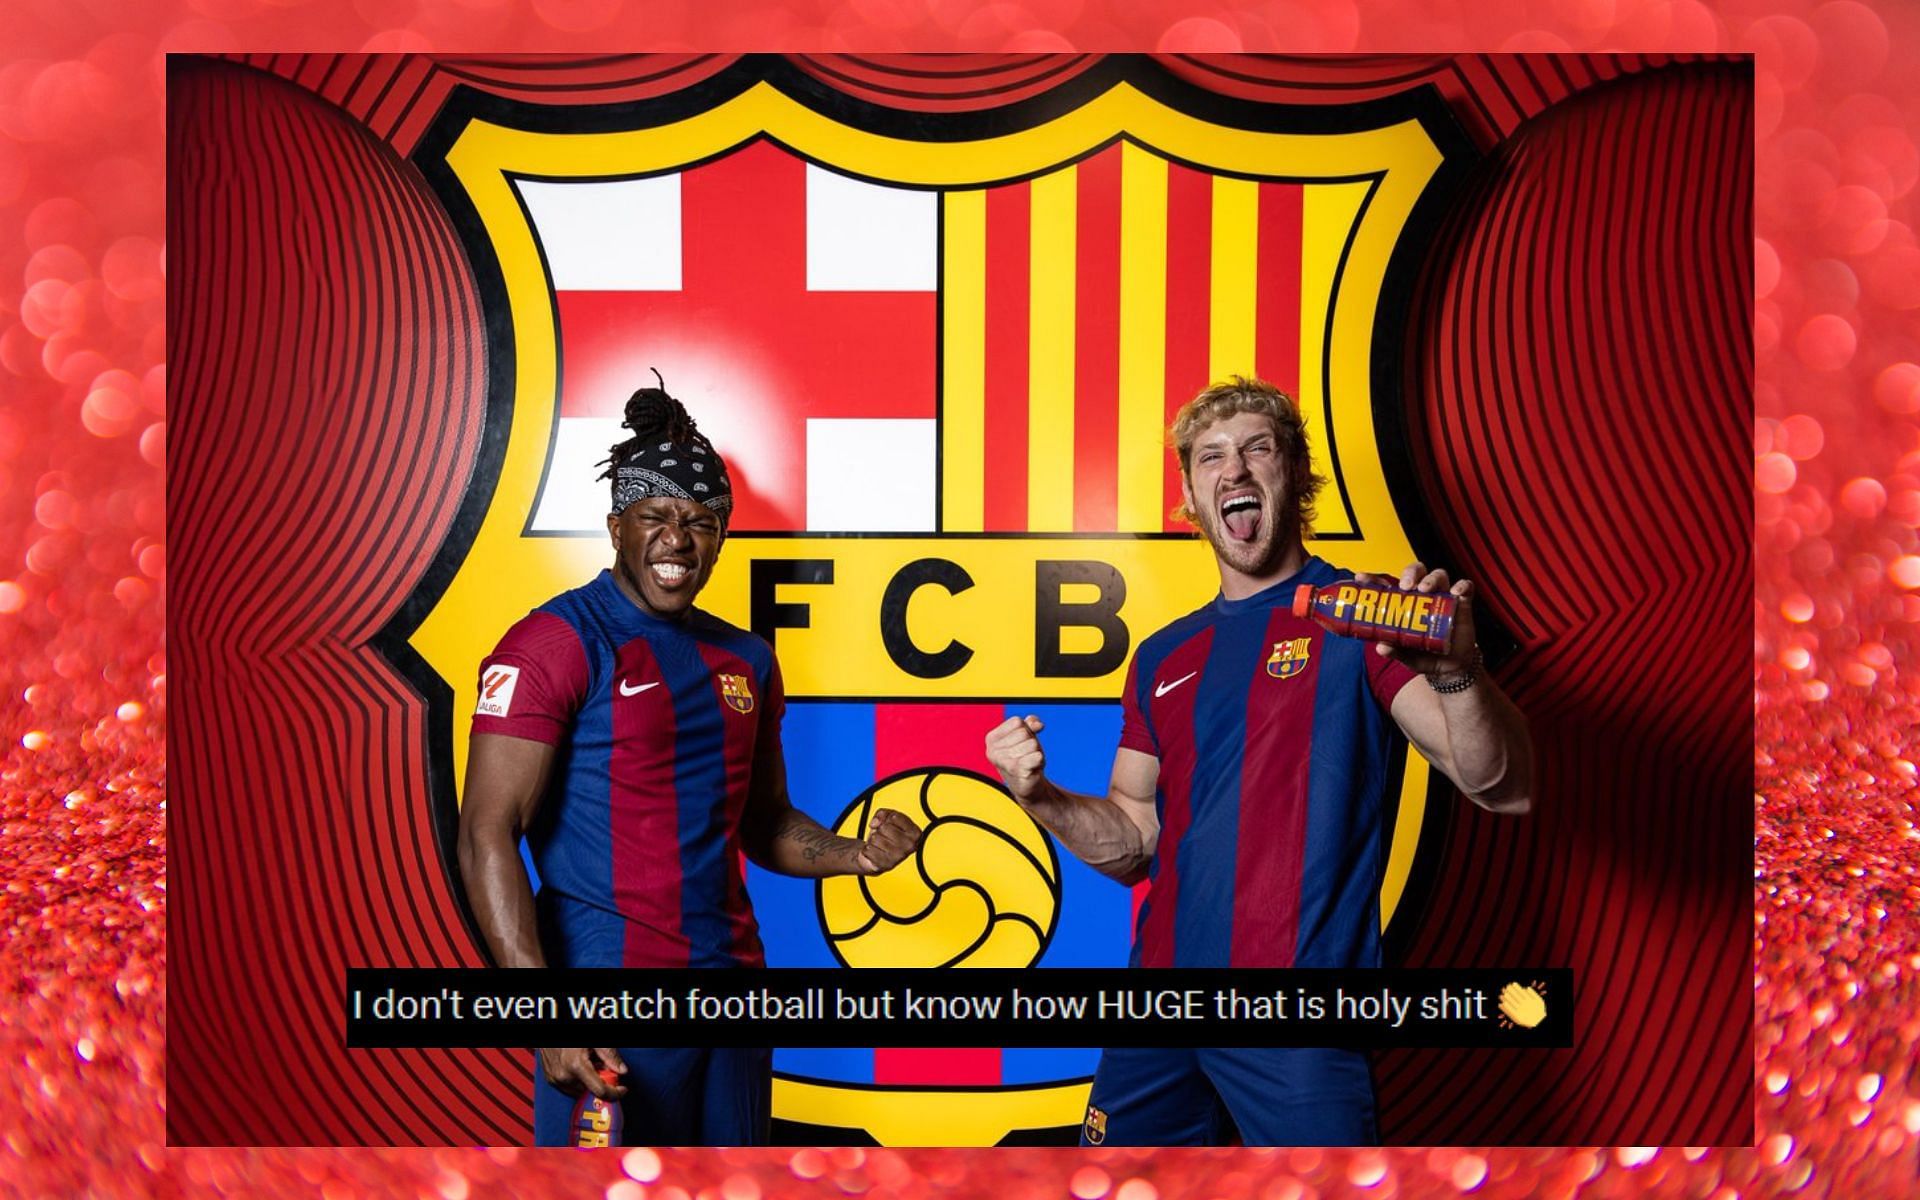 PRIME becomes the official energy drink of FC Barcelona